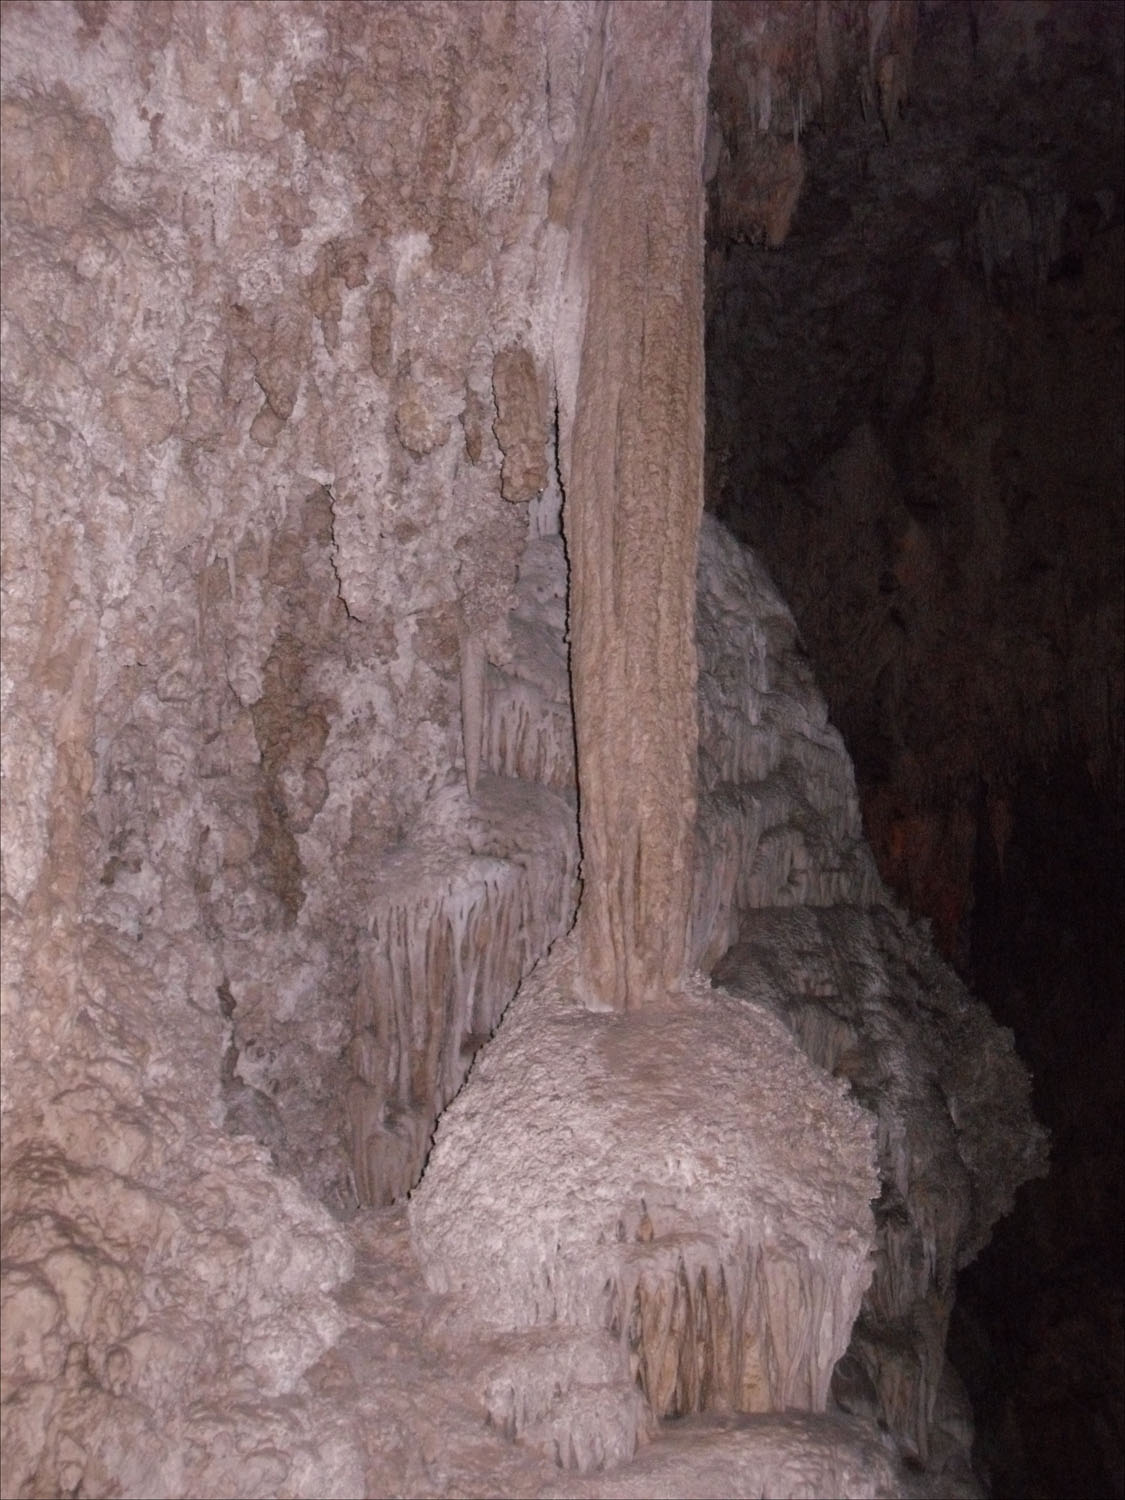 Carlsbad Caverns, NM-Lions Tail formations